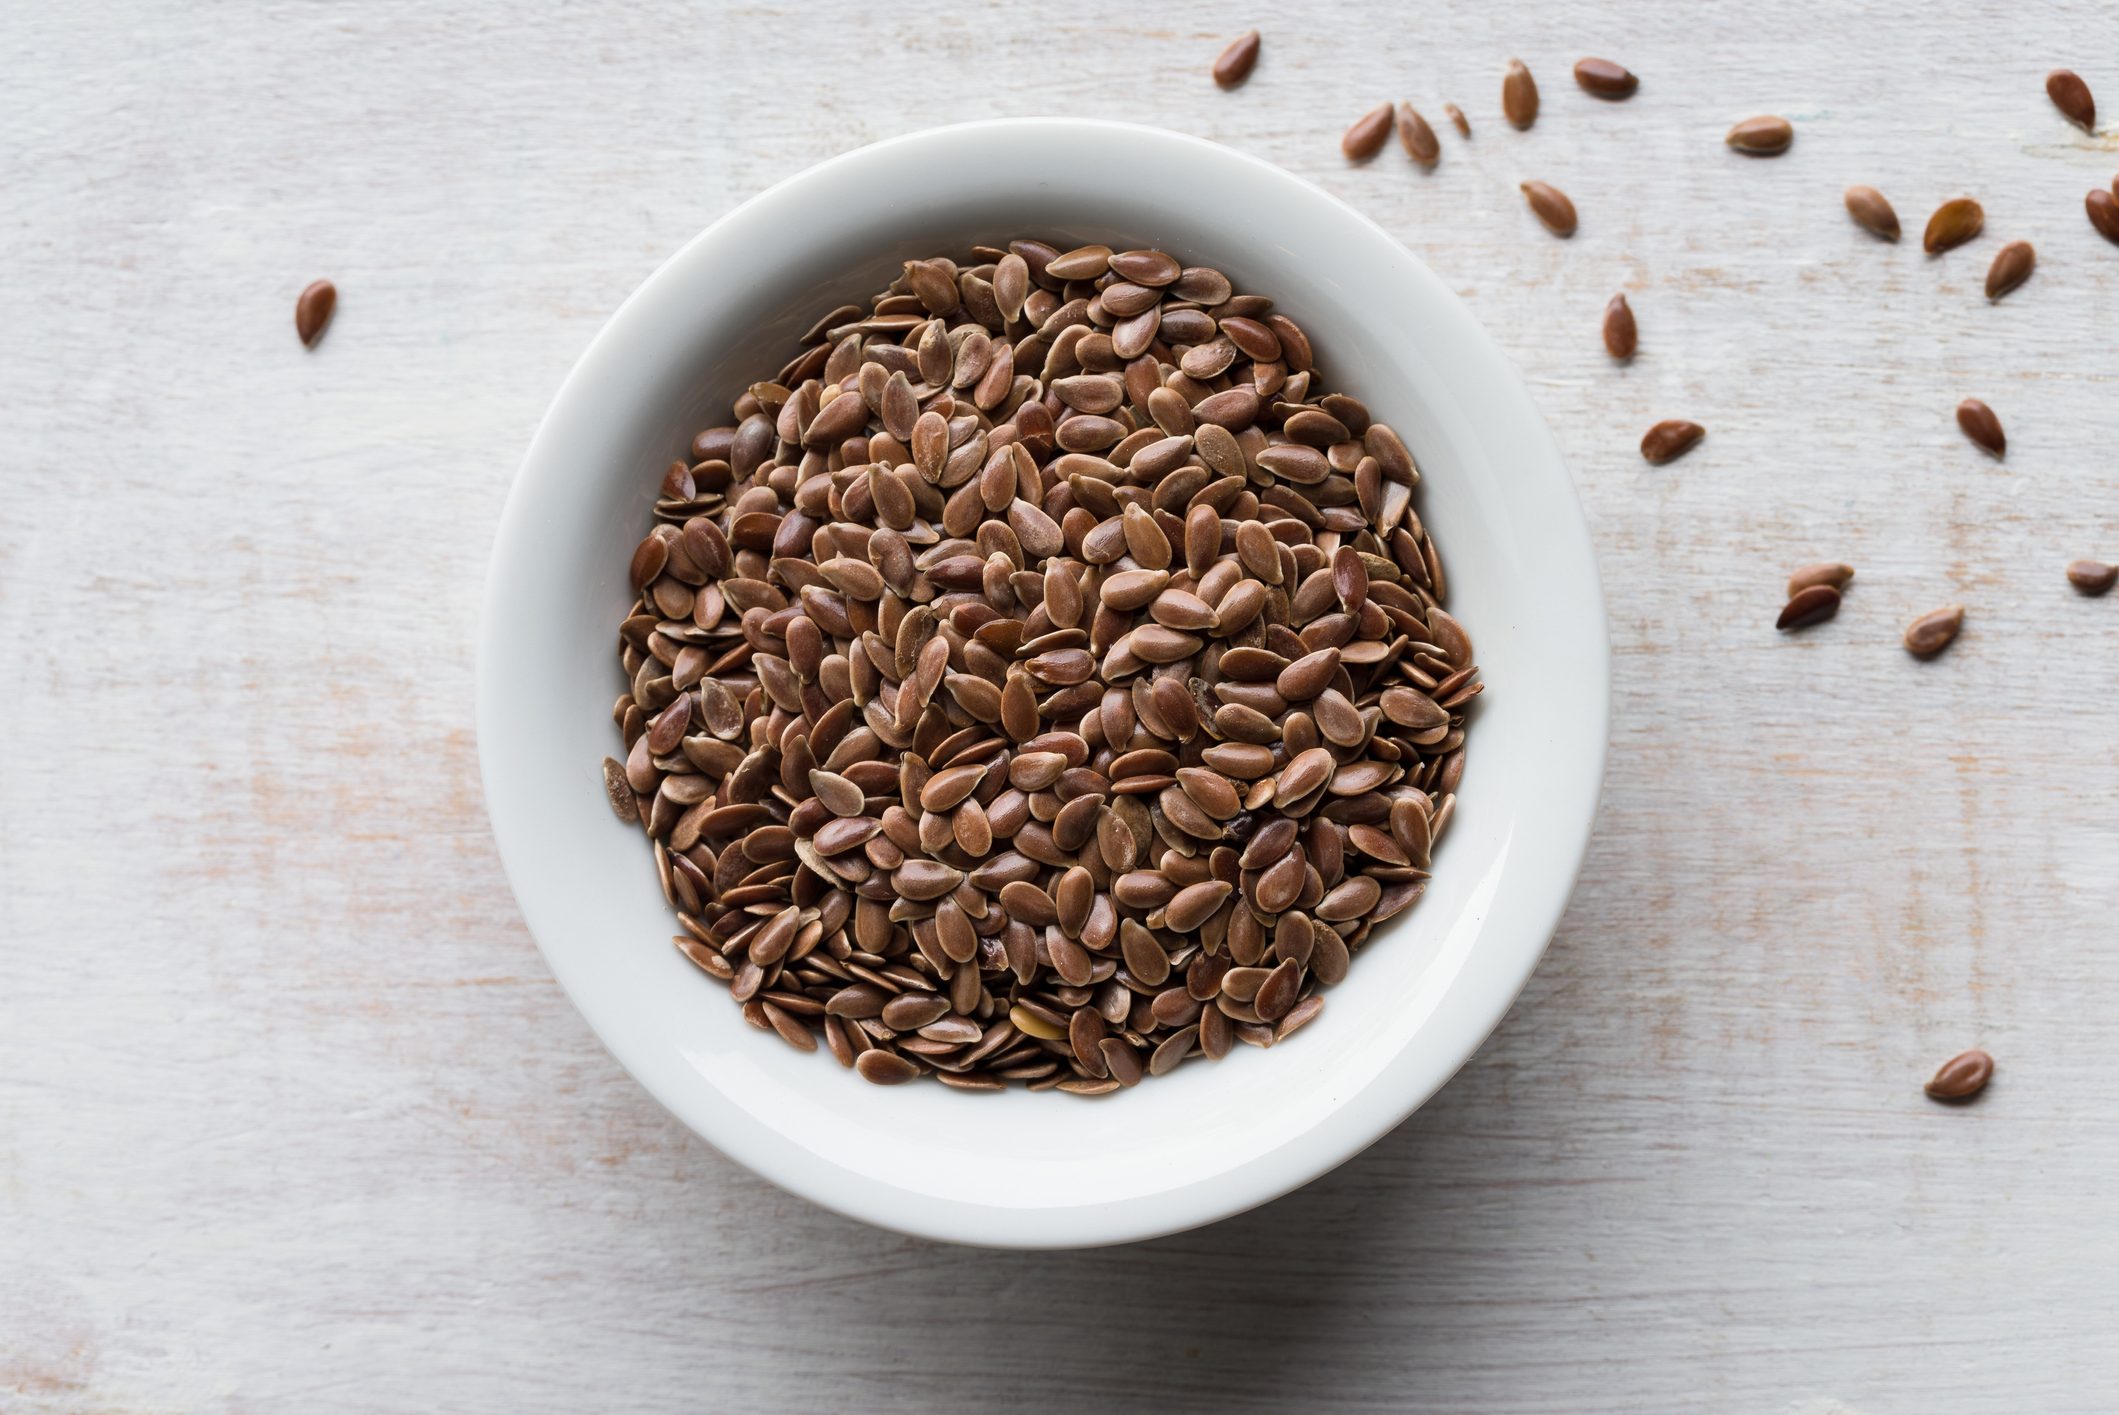 Should You Be Eating Flaxseeds? The Health Benefits, Risks, and Nutrition